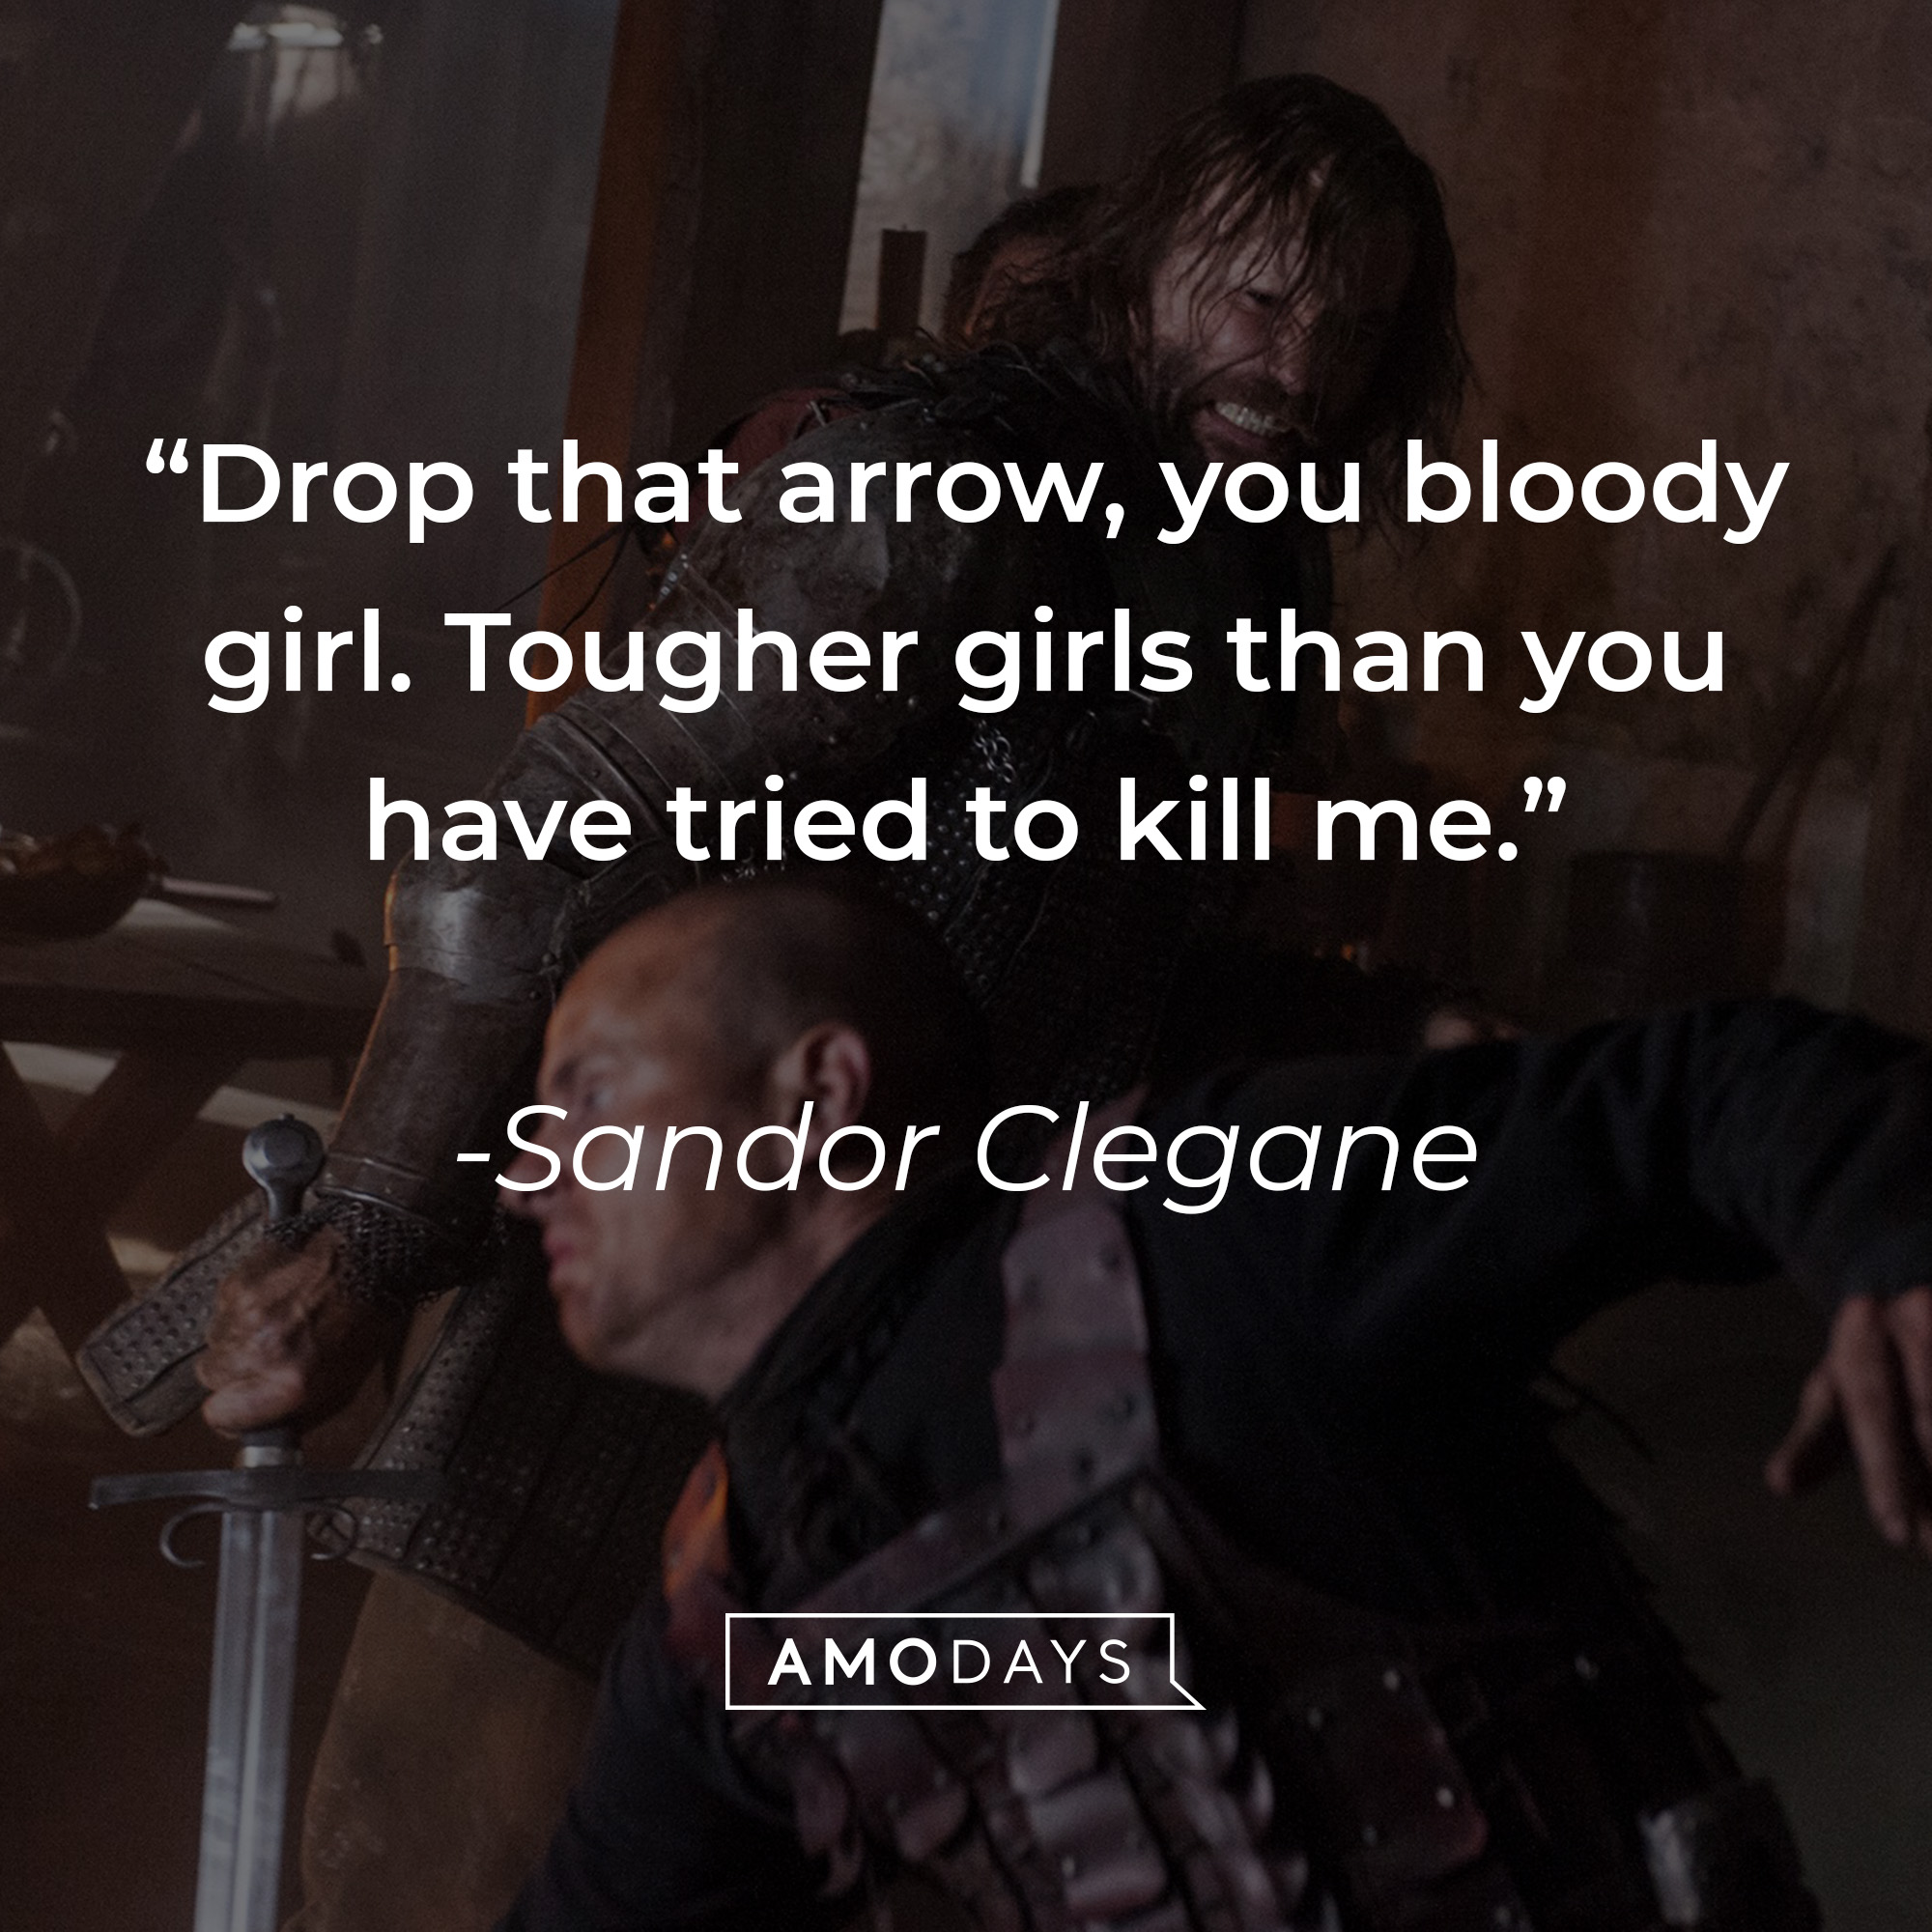 Sandor Clegane's quote: "Drop that arrow, you bloody girl. Tougher girls than you have tried to kill me." | Source: facebook.com/GameOfThrones